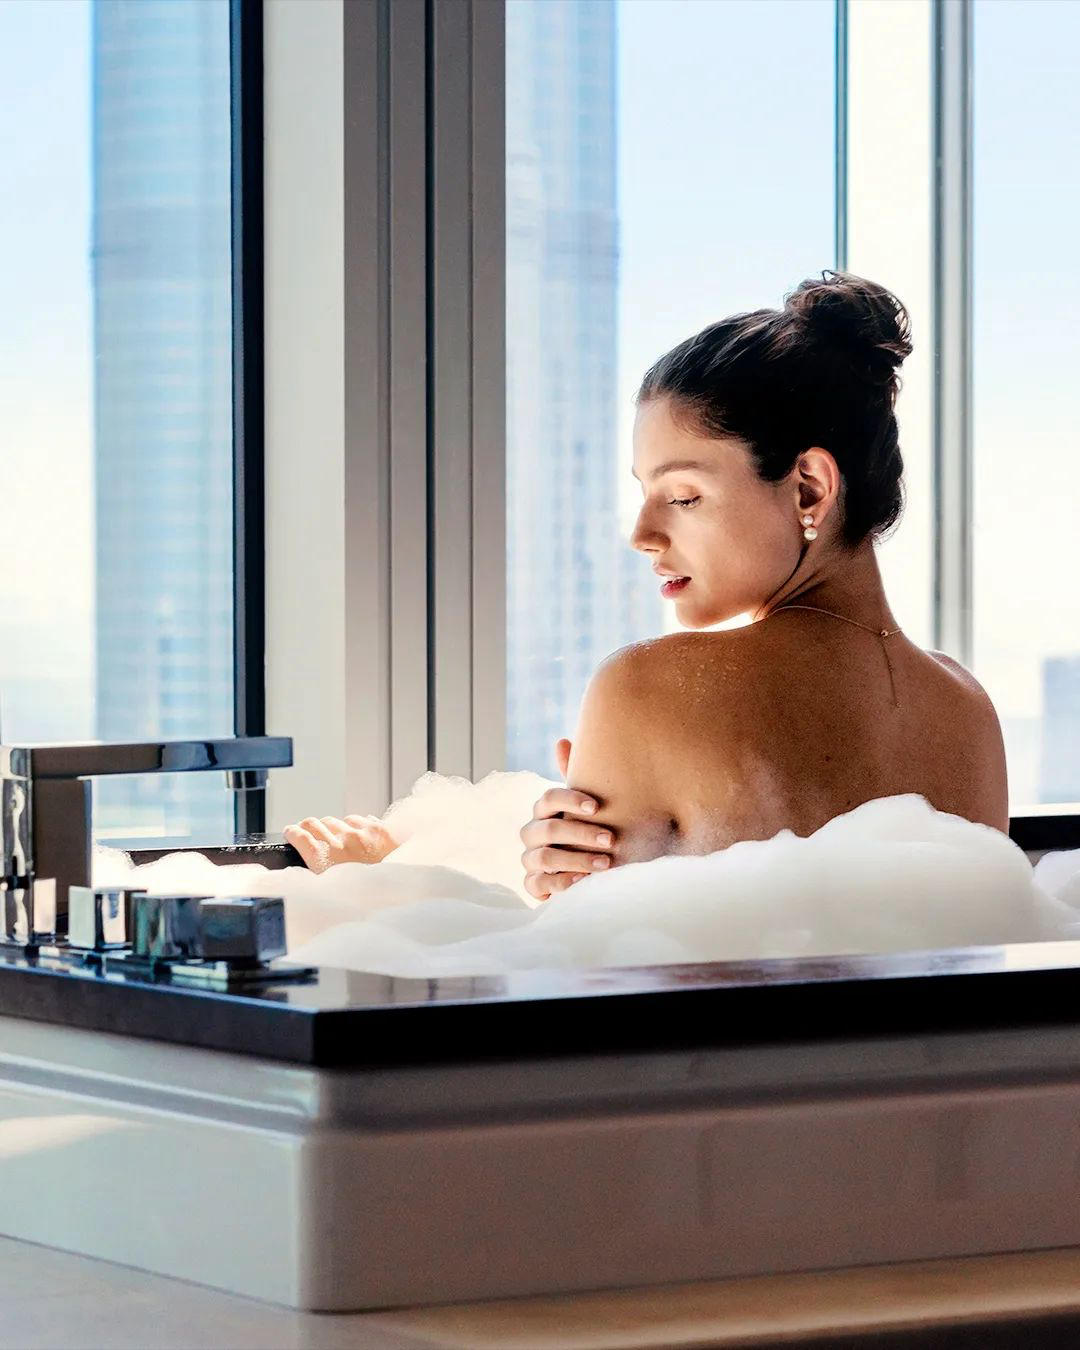 Address Sky View - Get in touch with your inner serenity at The Spa at Level 54